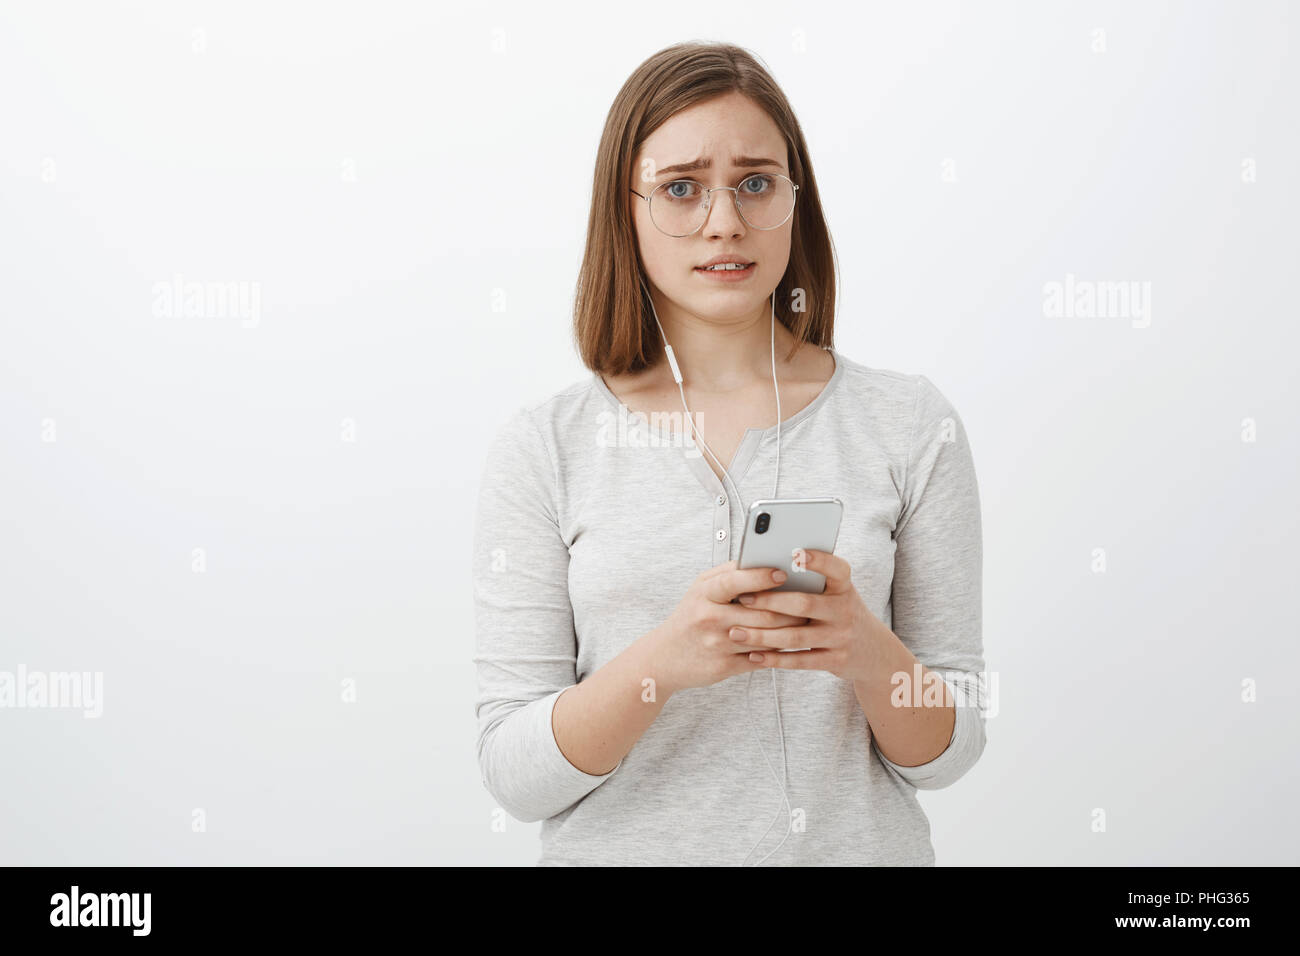 Girl feeling worried one earphone broke down. Portrait of displeased and concerned upset cute woman in glasses with short brown hair frowning and making sad face holding smartphone wearing headphones Stock Photo